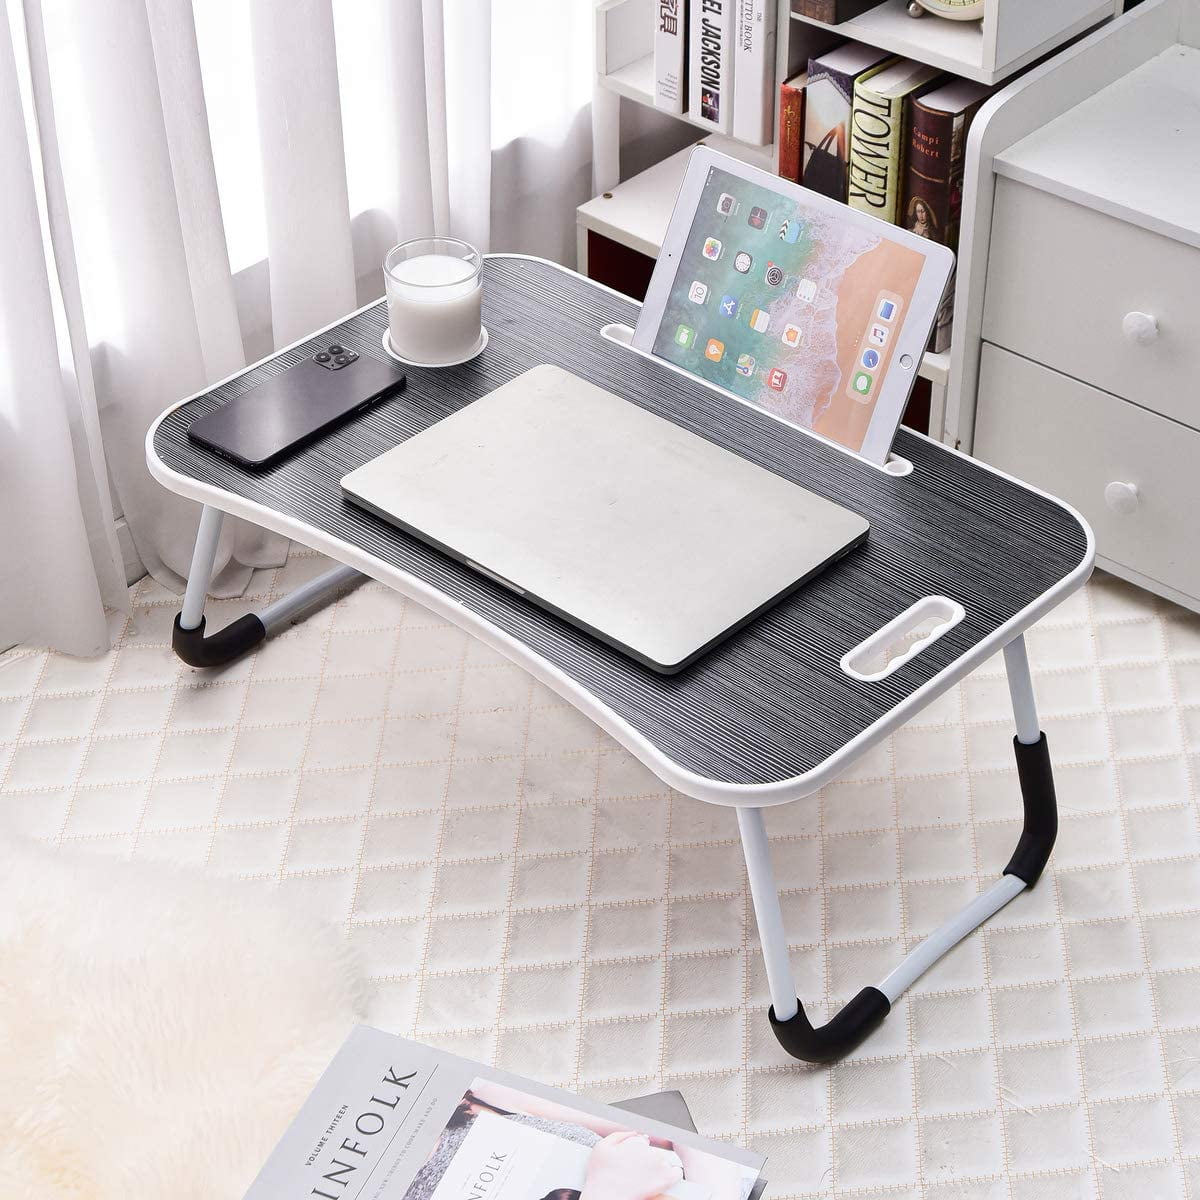 Lap Standing Desk Laptop Bed Table Reading Working on Bed Sofa RHtvrll Laptop Desk Notebook Stand with Tablet Slot & Cup Holder for Watching Portable Notebook Table Desk Foldable Laptop Bed Tray